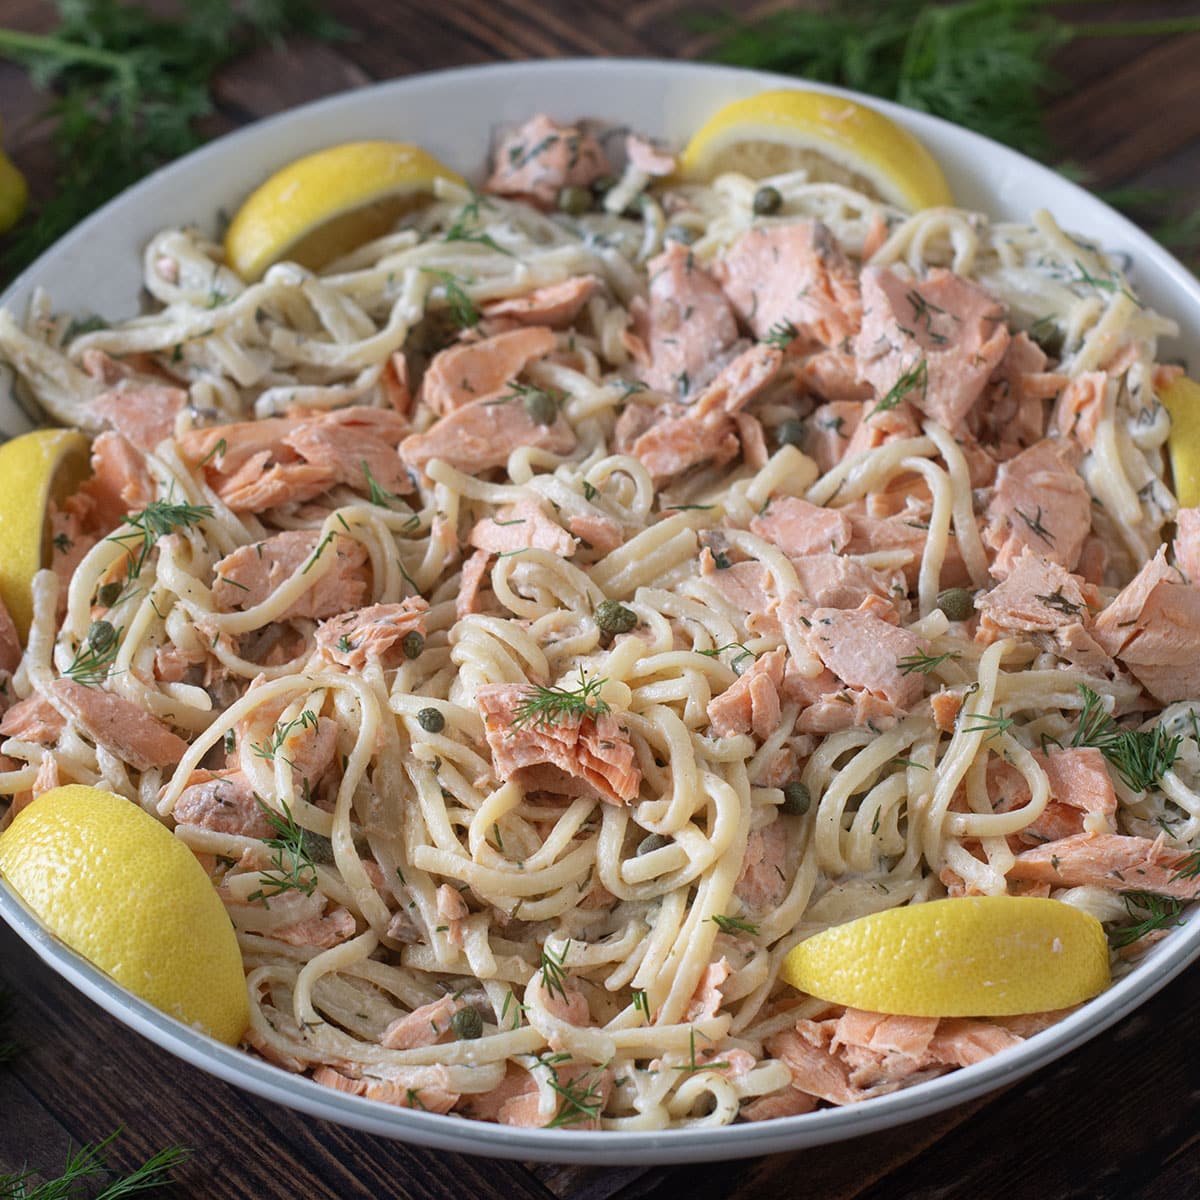 White bowl of pasta with creamy sauce, salmon pieces, and lemon wedges.